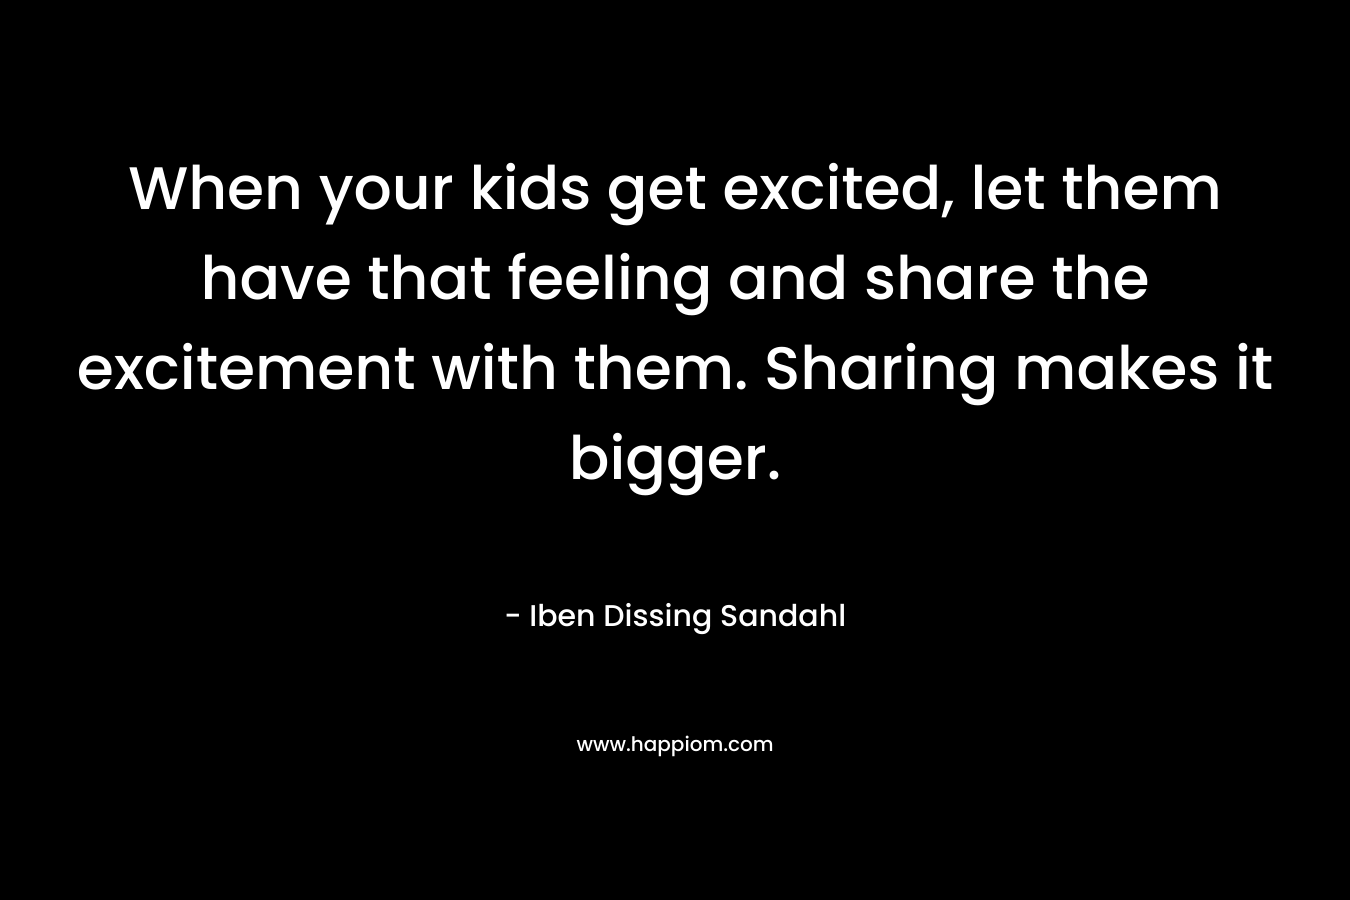 When your kids get excited, let them have that feeling and share the excitement with them. Sharing makes it bigger. – Iben Dissing Sandahl